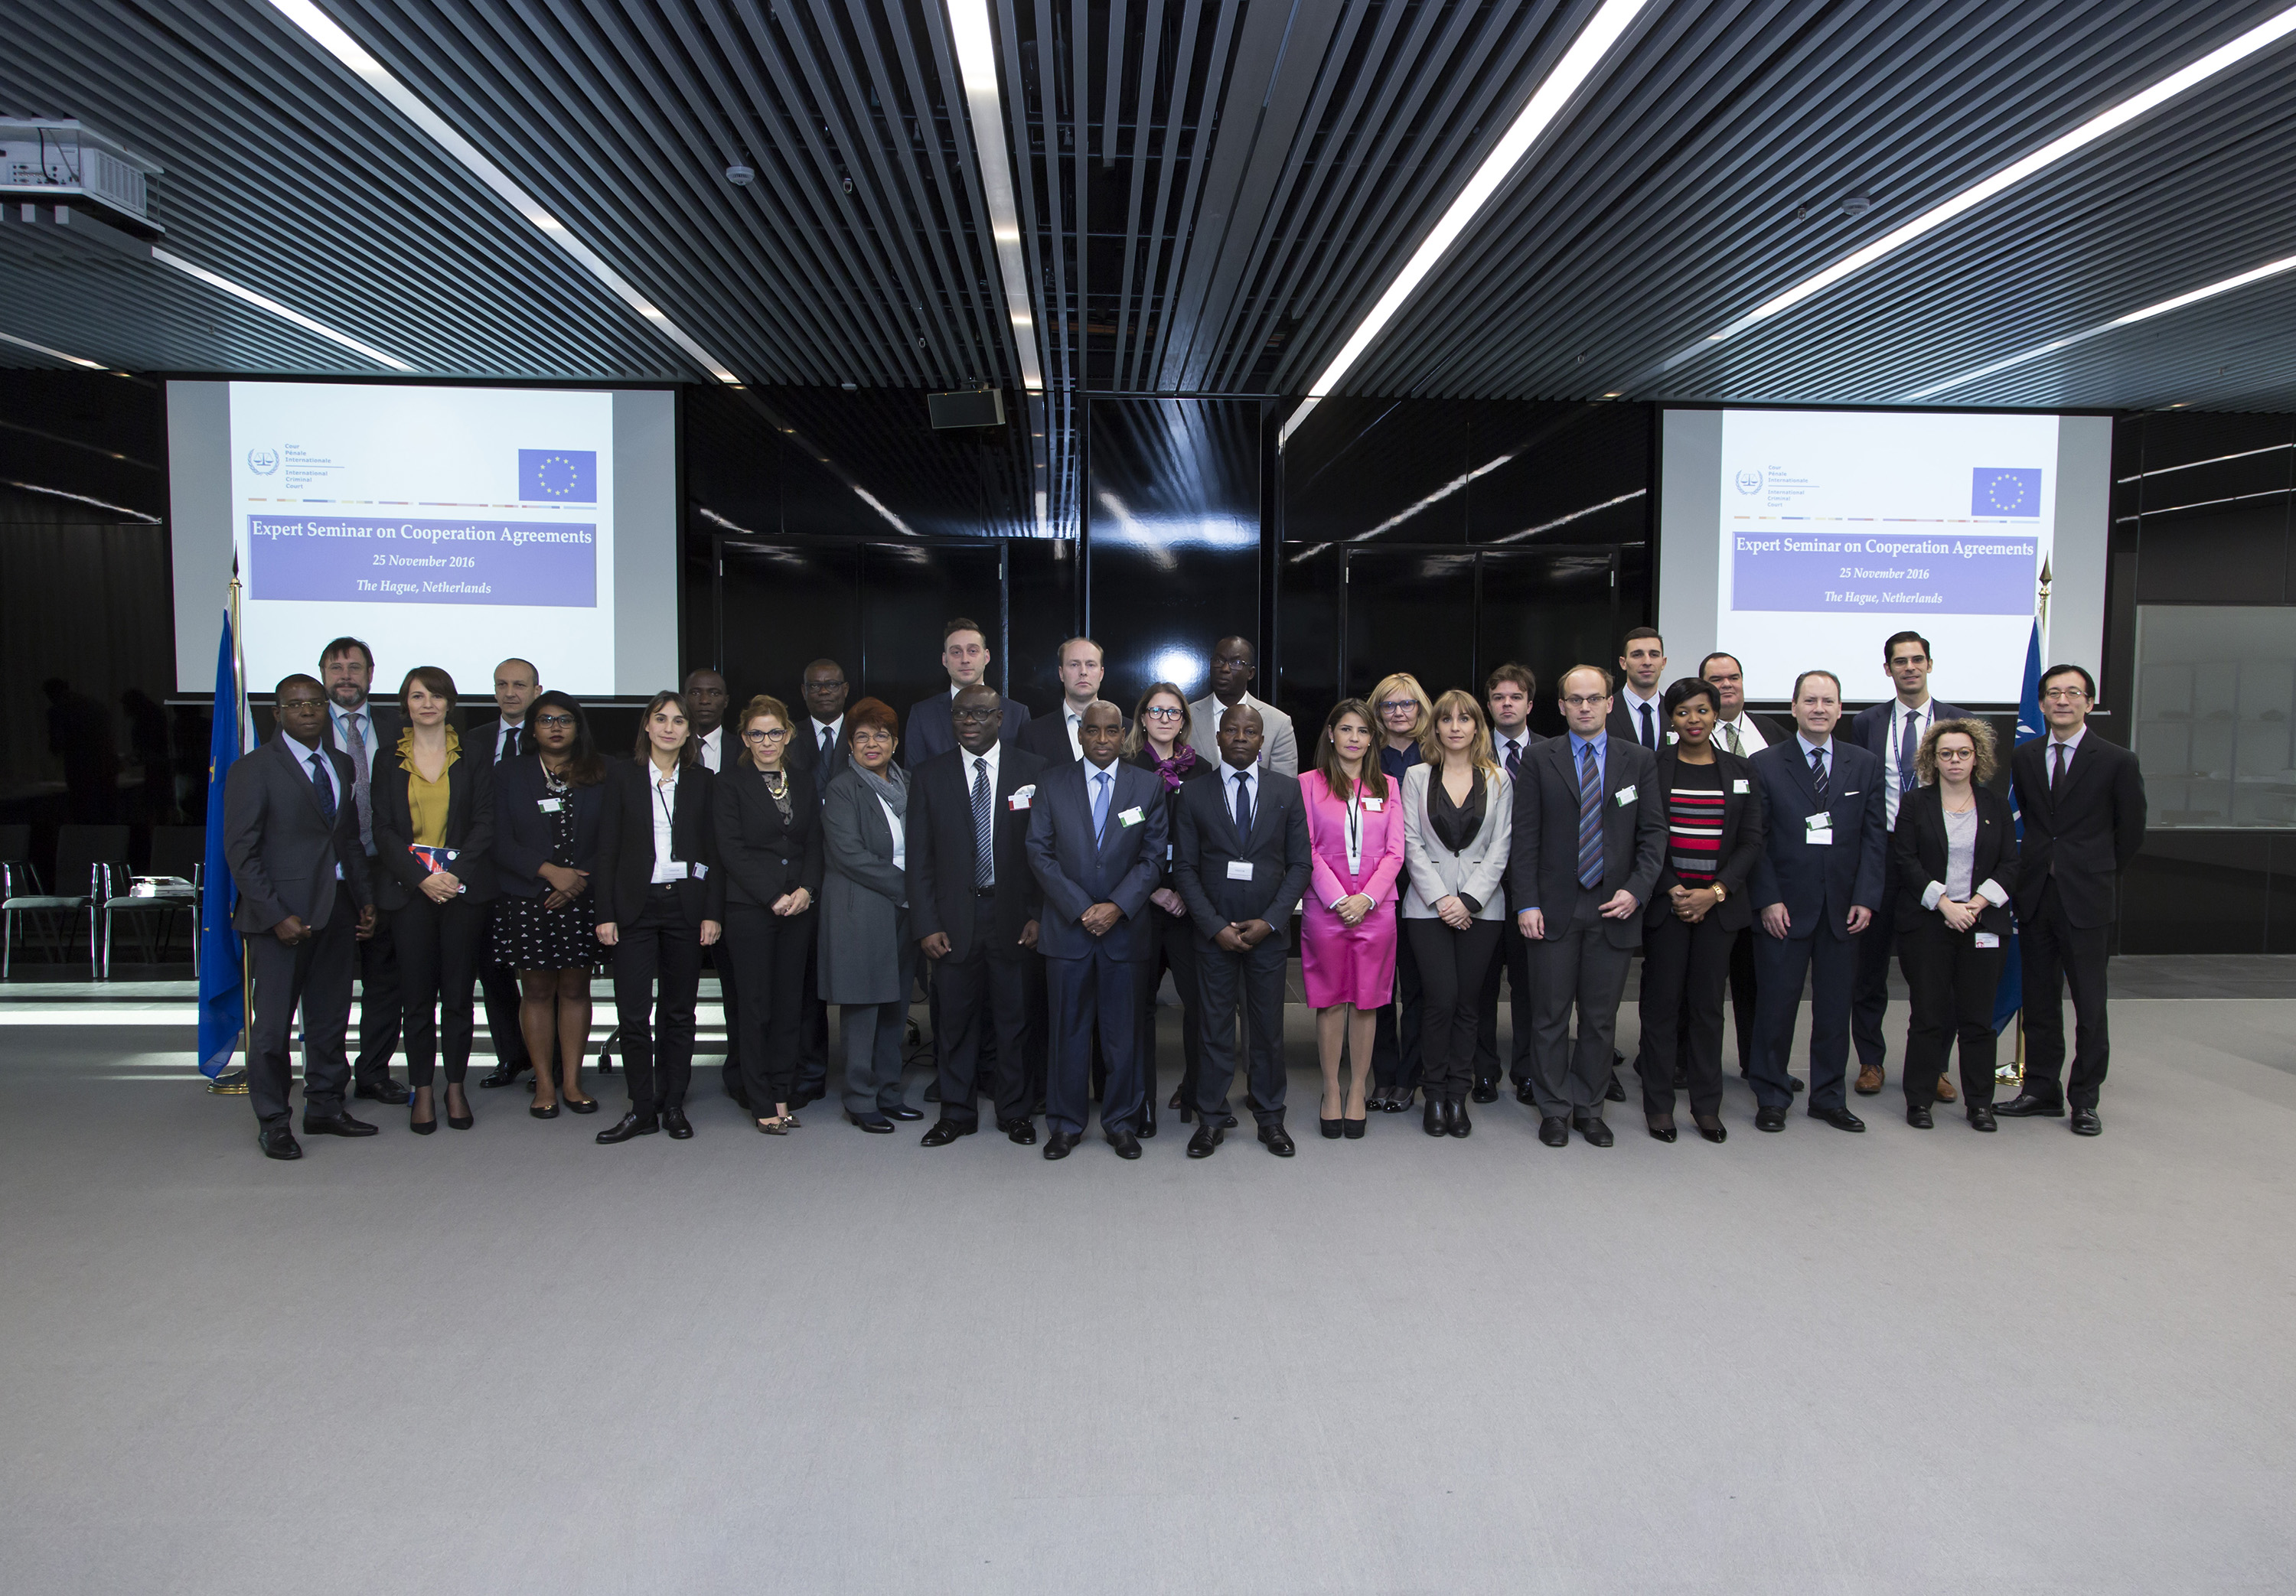 The participants of the expert Seminar on cooperation agreements held at the seat of the International Criminal Court in The Hague on 25 November 2016 ©ICC-CPI 